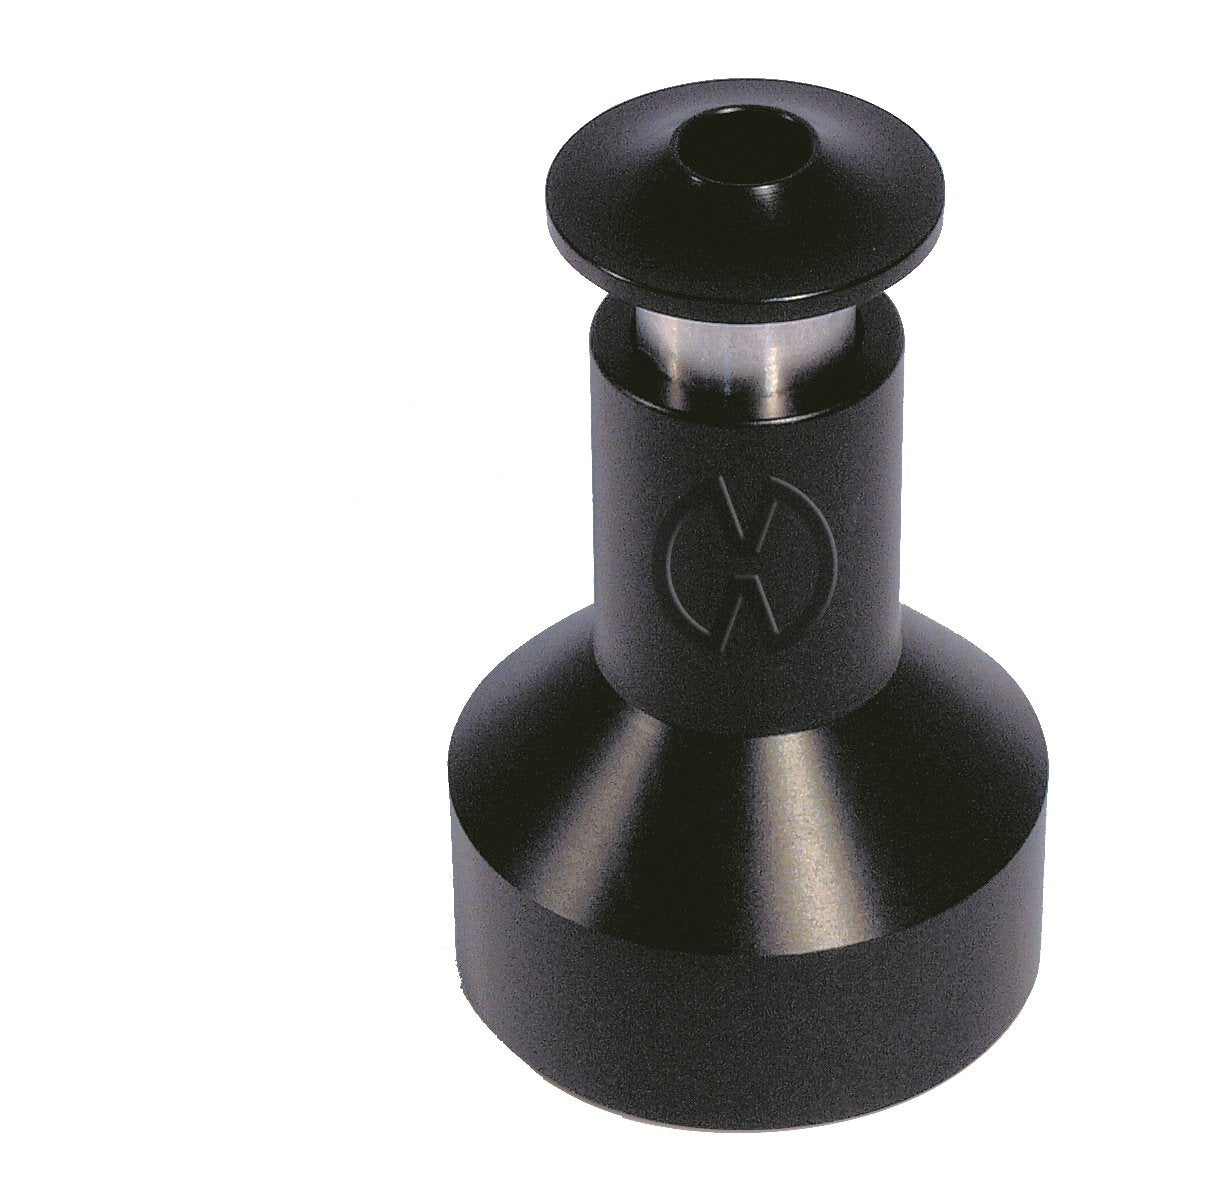 SOLID Valve Mouthpiece